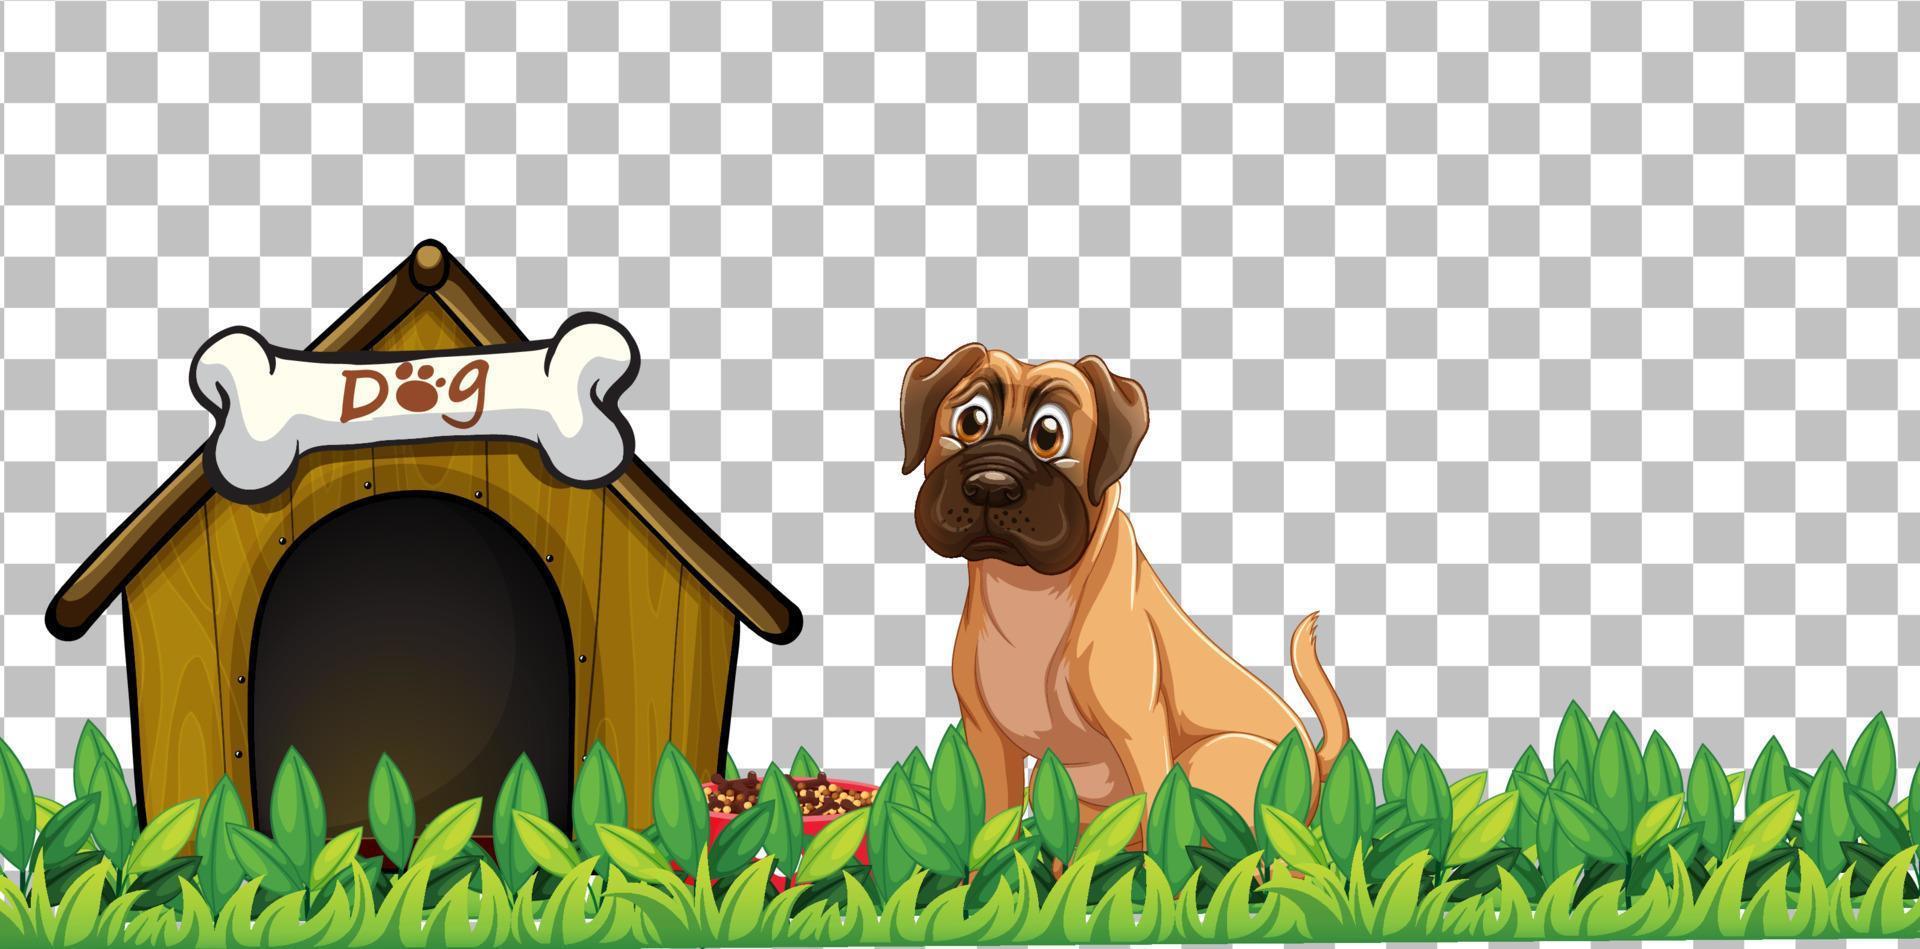 Boxer dog with dog house on grid background vector